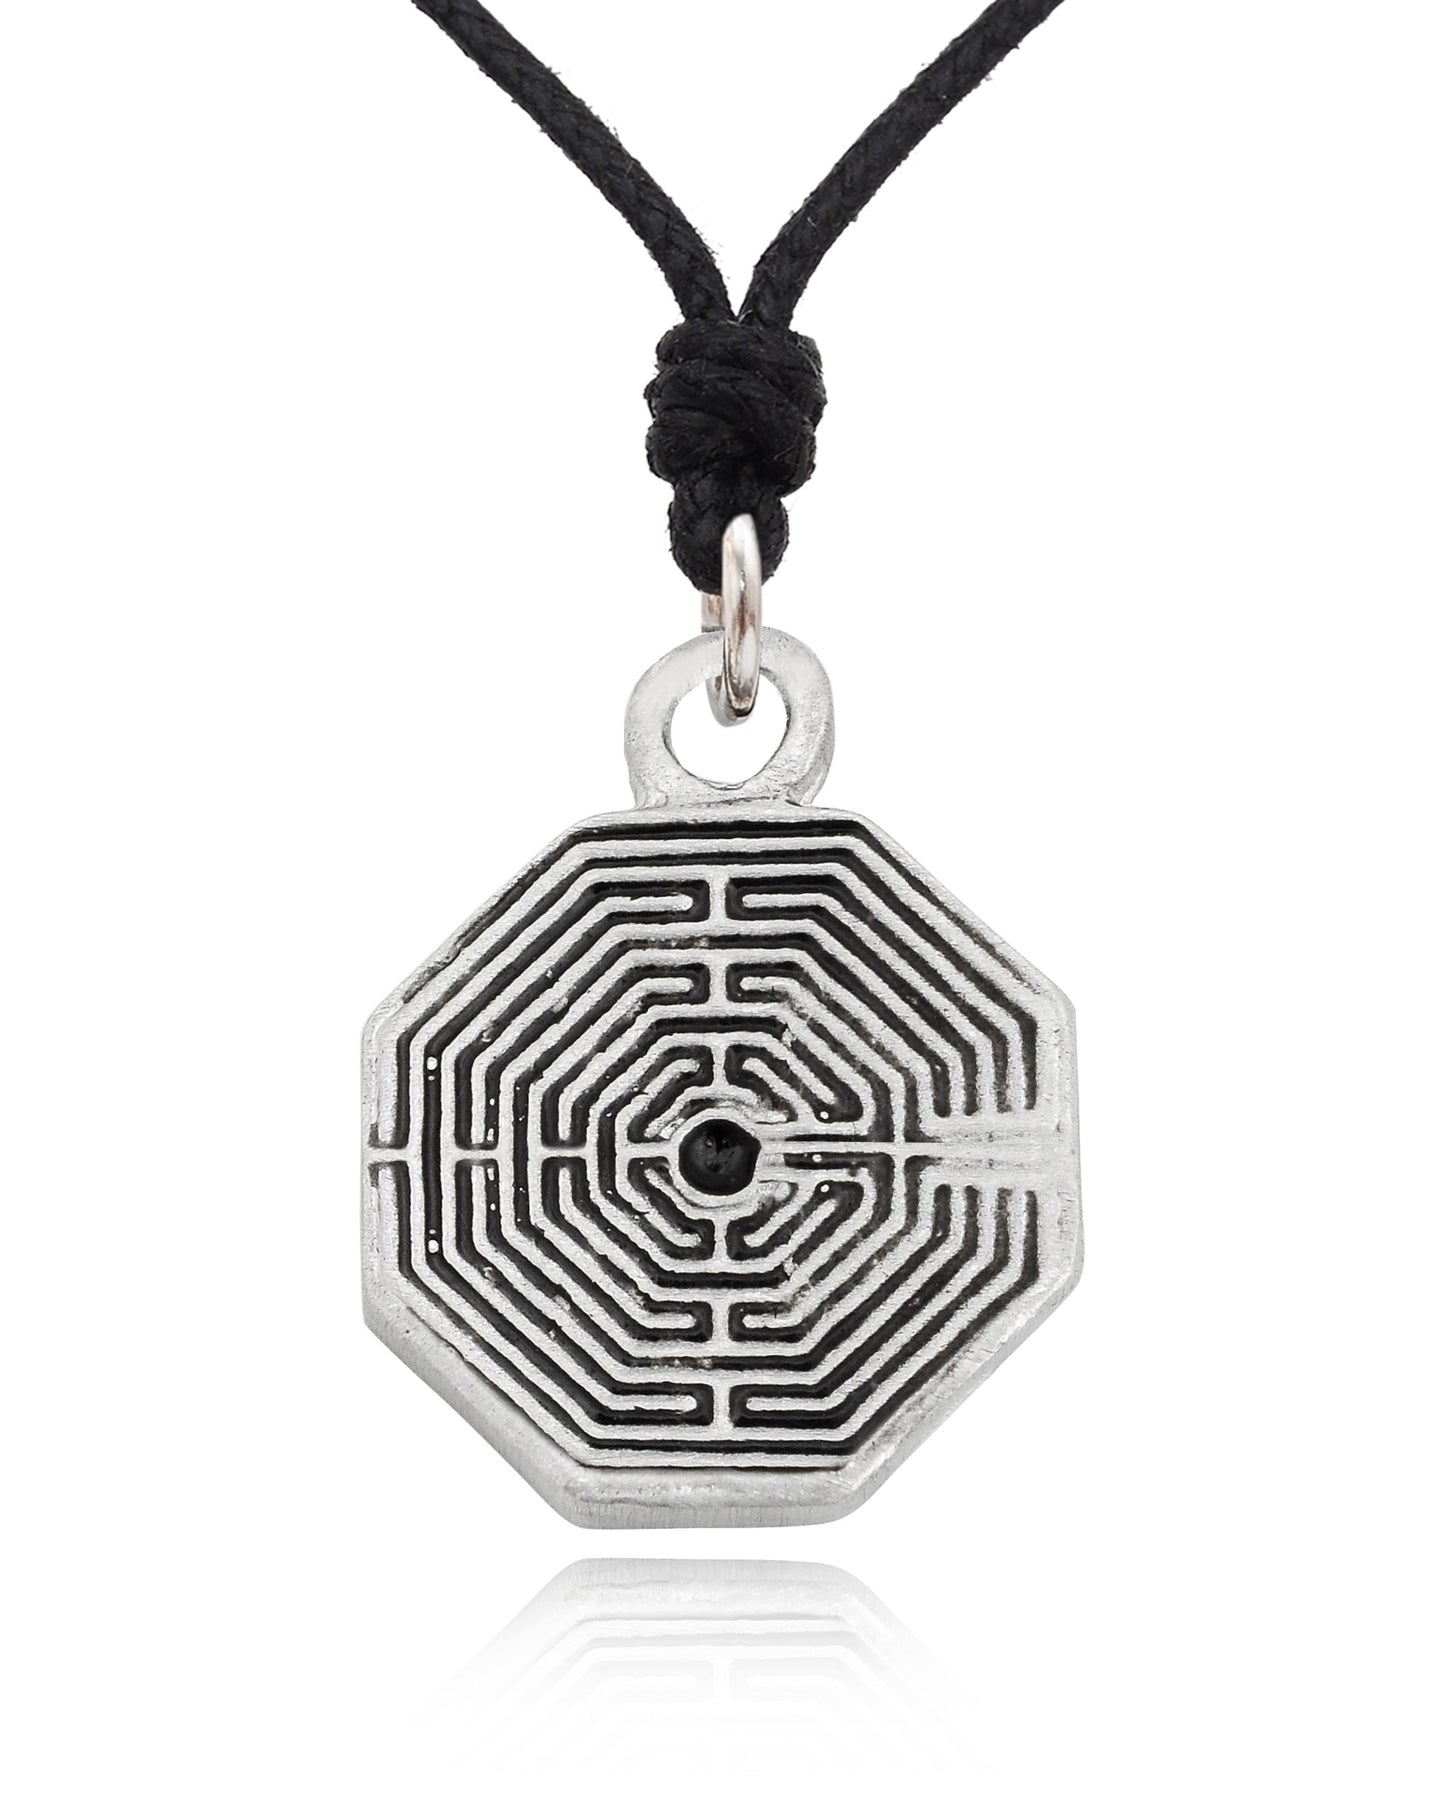 Labyrinth Silver Pewter Charm Necklace Pendant Jewelry